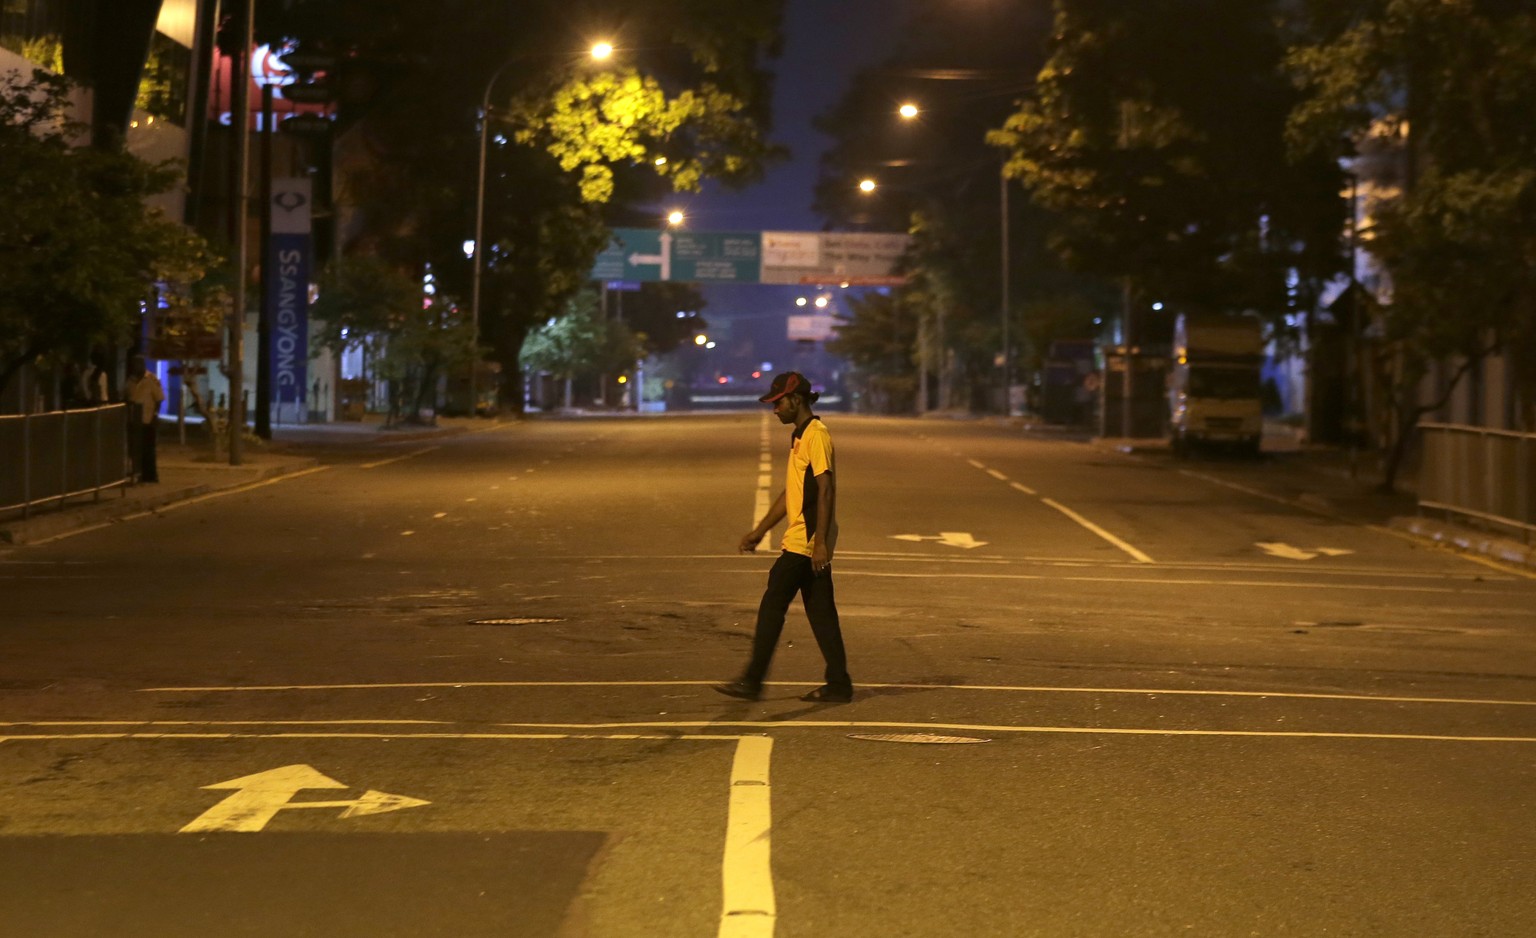 A Sri Lankan man walks across a deserted street during a curfew in Colombo, Sri Lanka, Sunday, April 21, 2019. More than two hundred people were killed and hundreds more injured in eight blasts that r ...